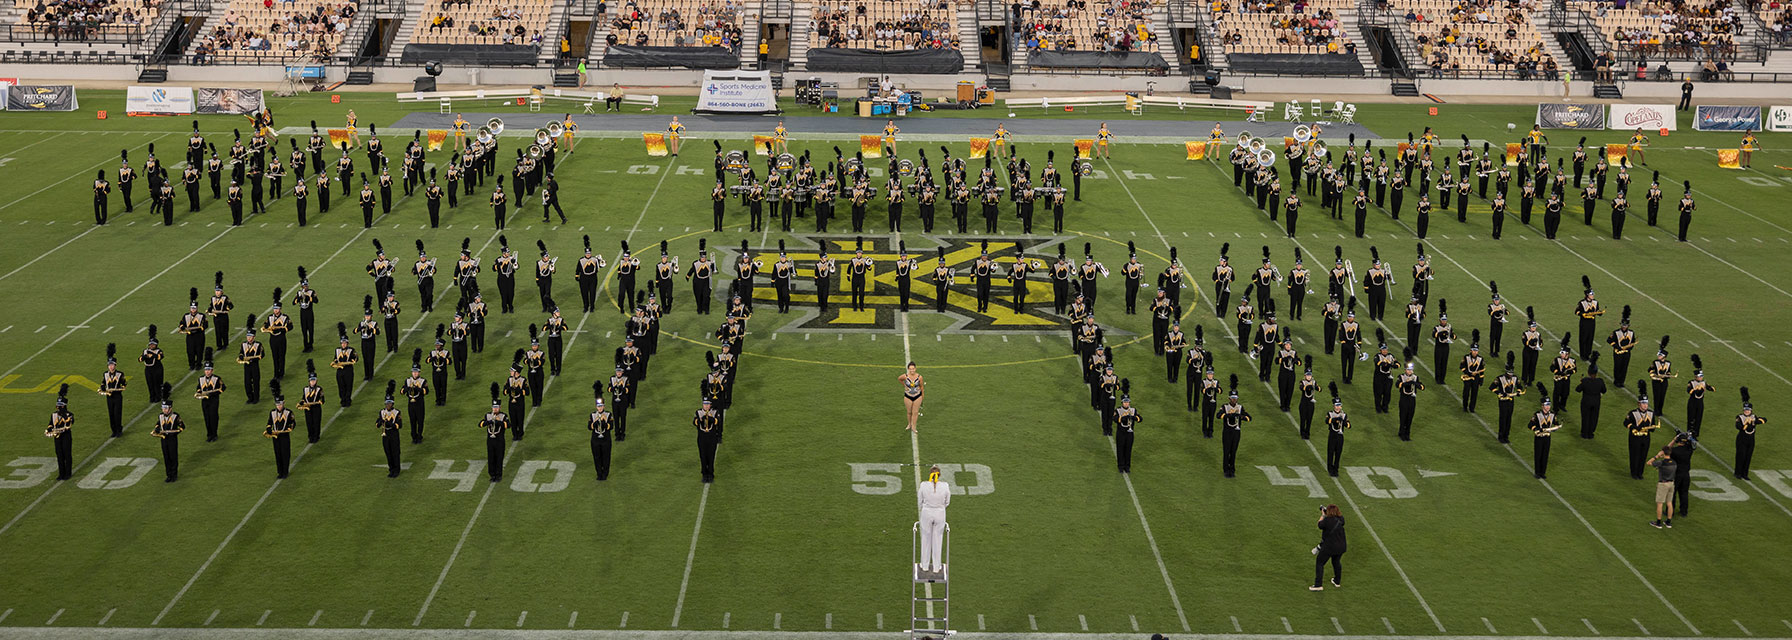 "The Marching Owls" performing during a football game